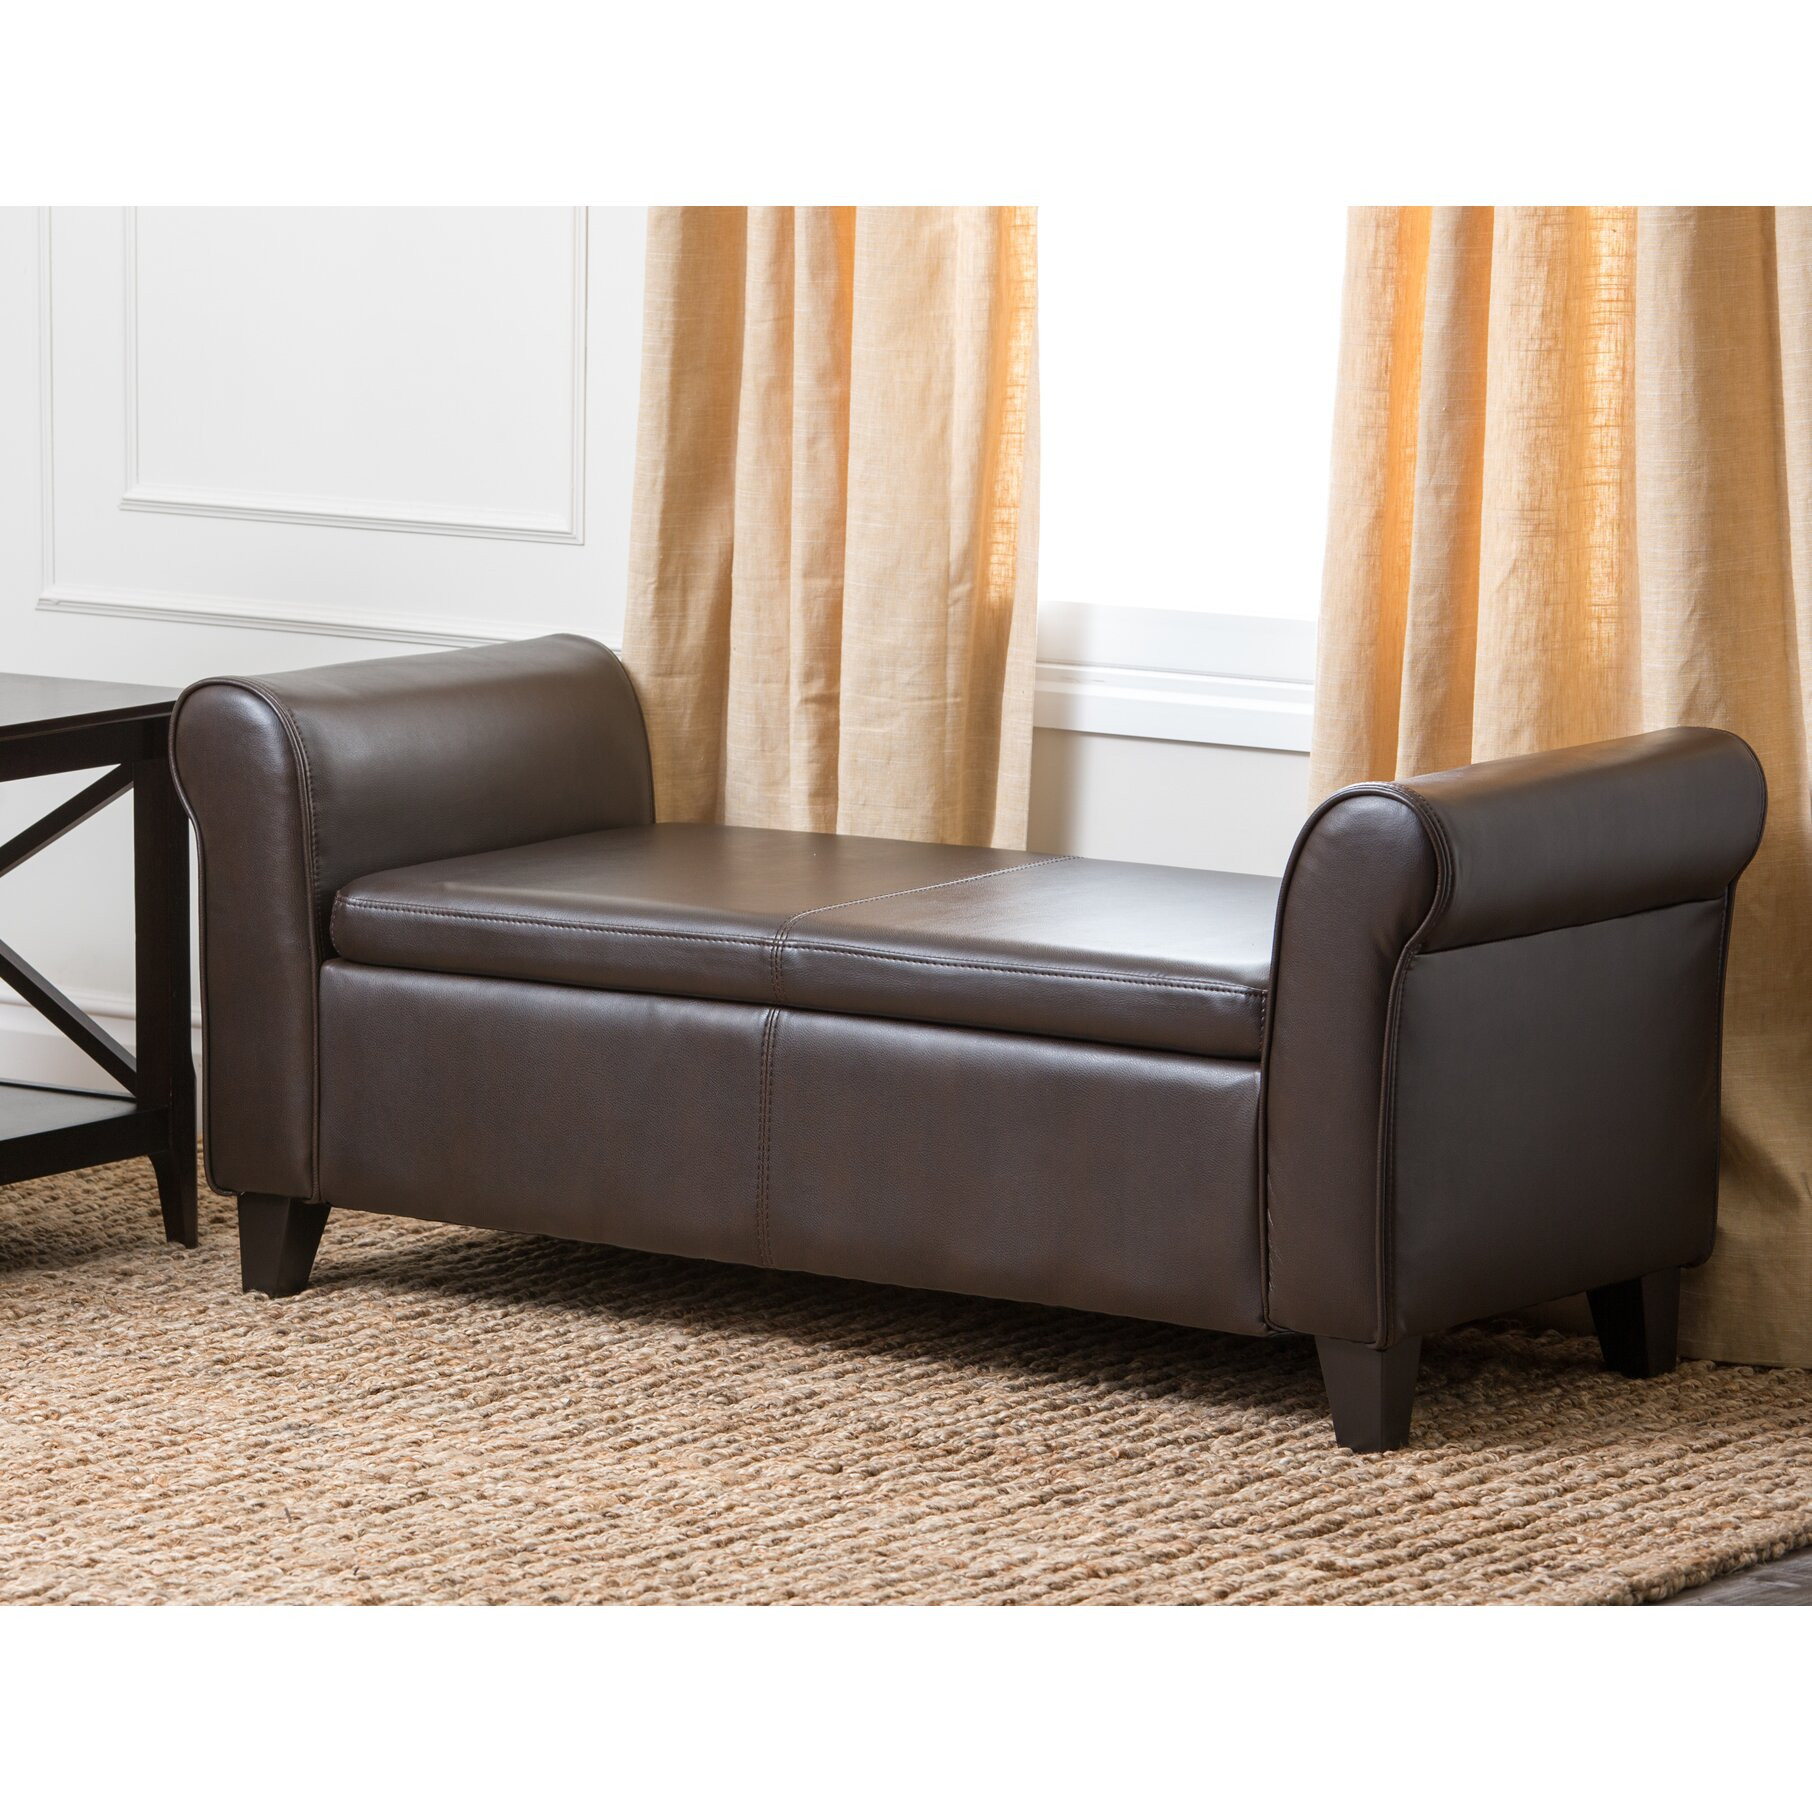 Bedroom Bench With Storage
 Abbyson Living Easton Leather Bedroom Storage Bench